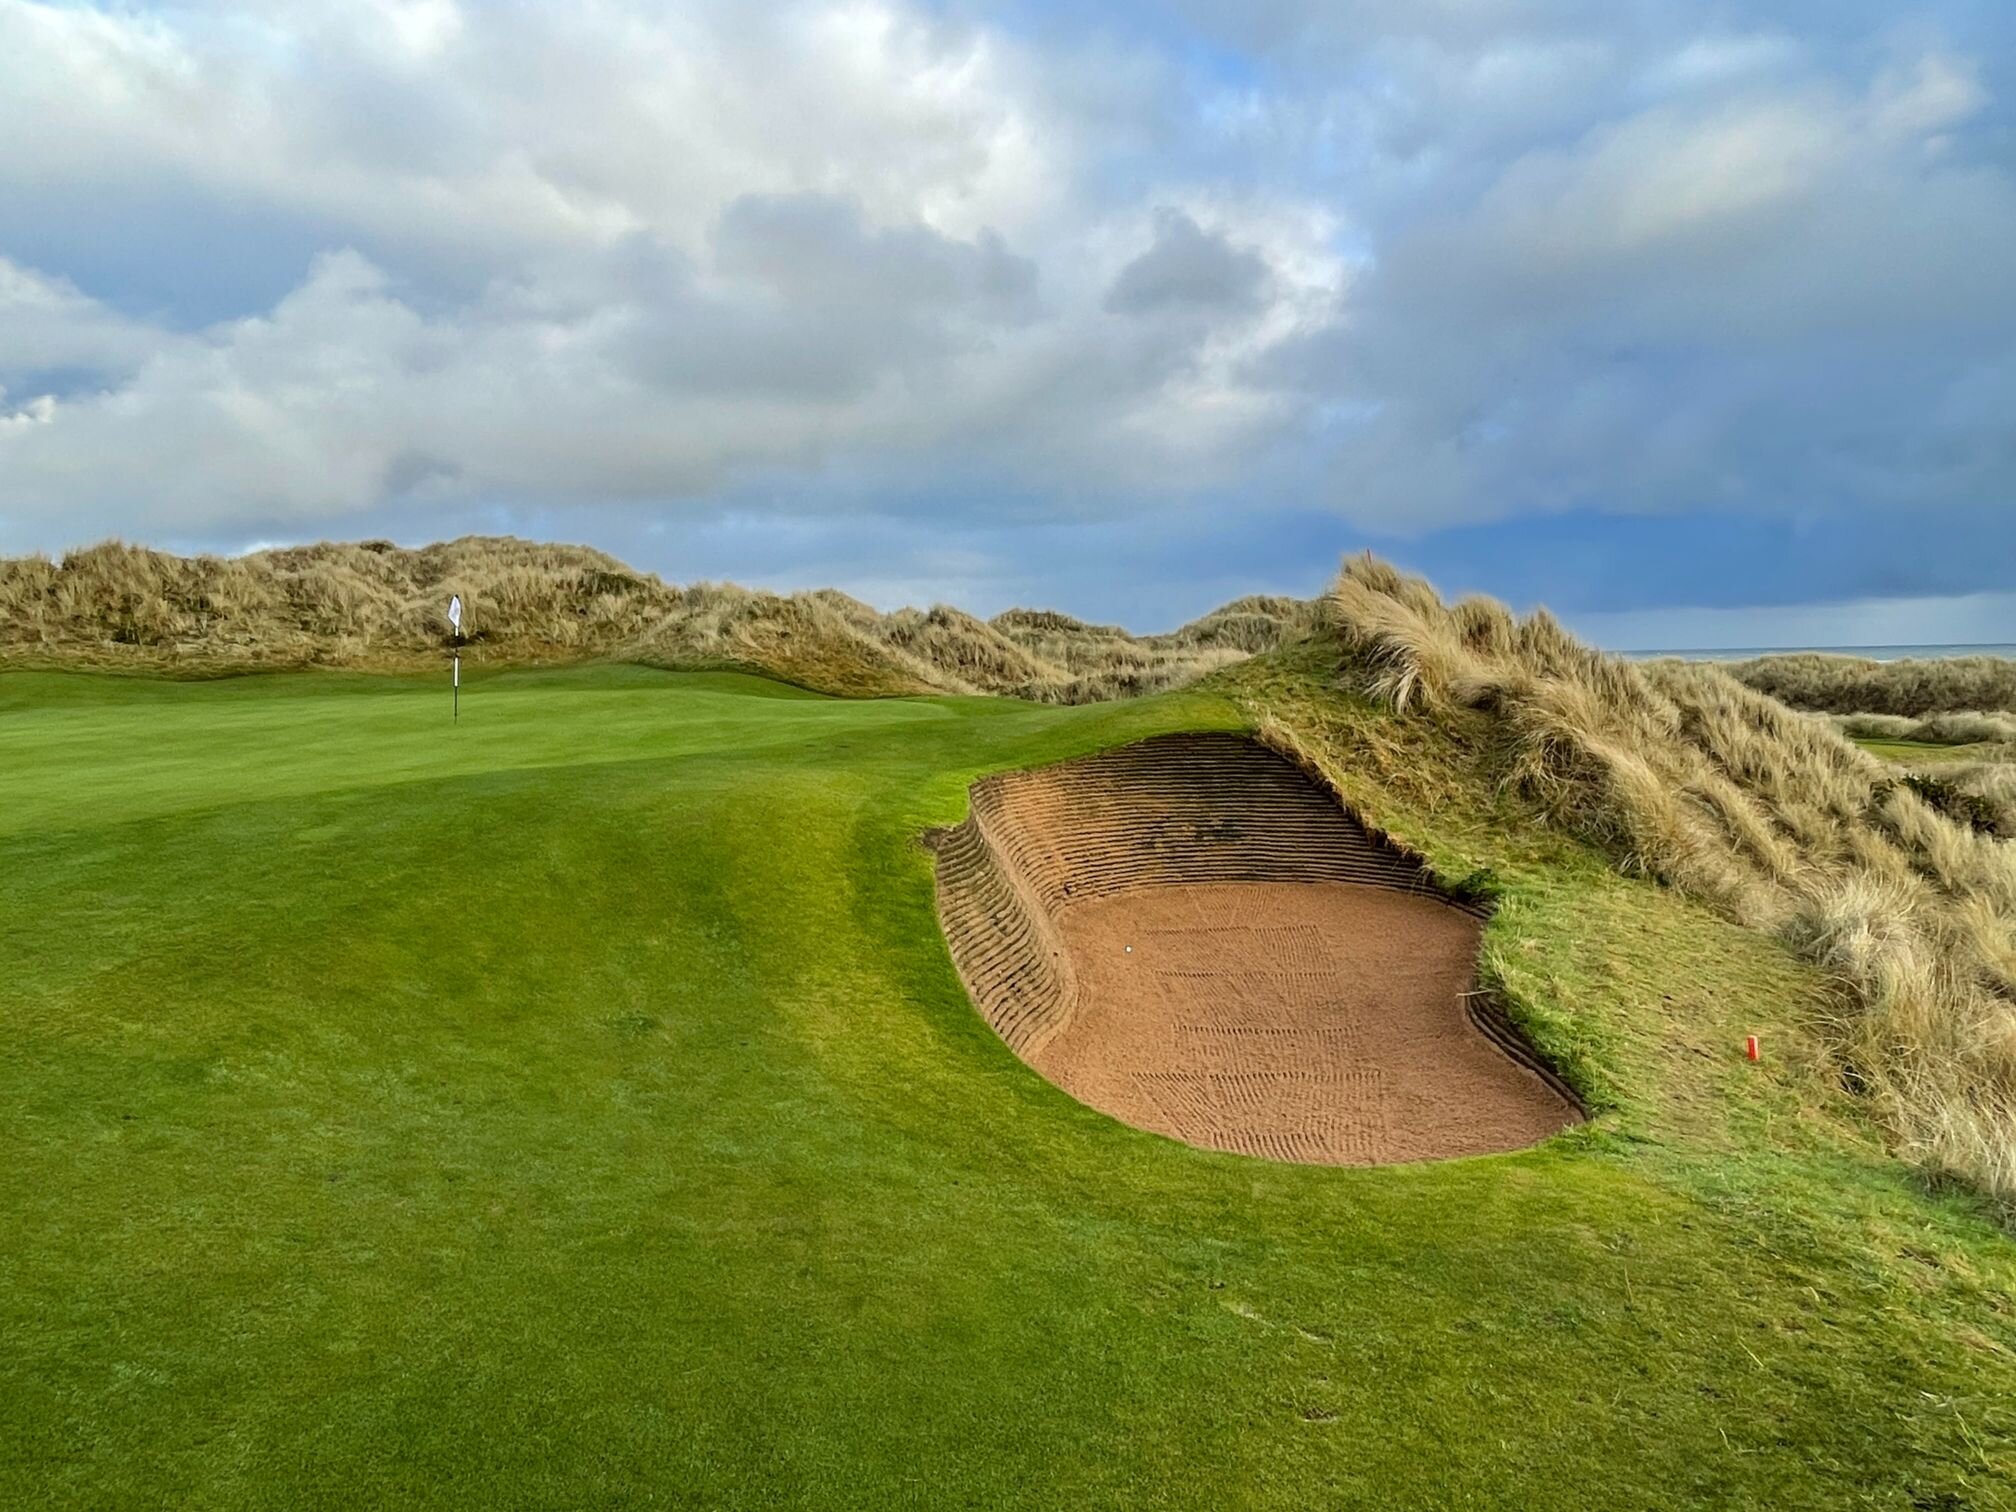 A deep bunker protects the par 3 6th